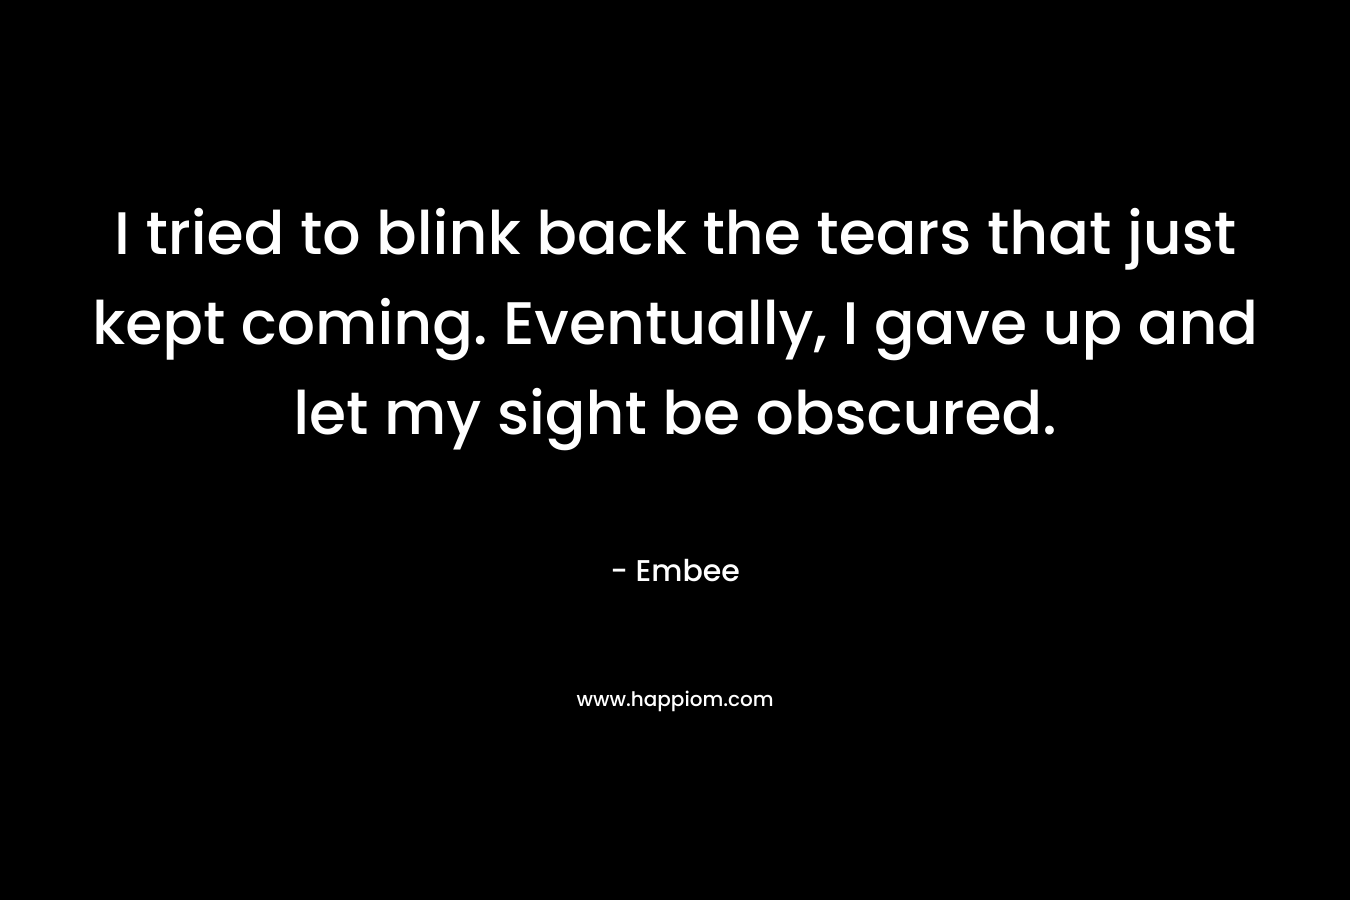 I tried to blink back the tears that just kept coming. Eventually, I gave up and let my sight be obscured. – Embee